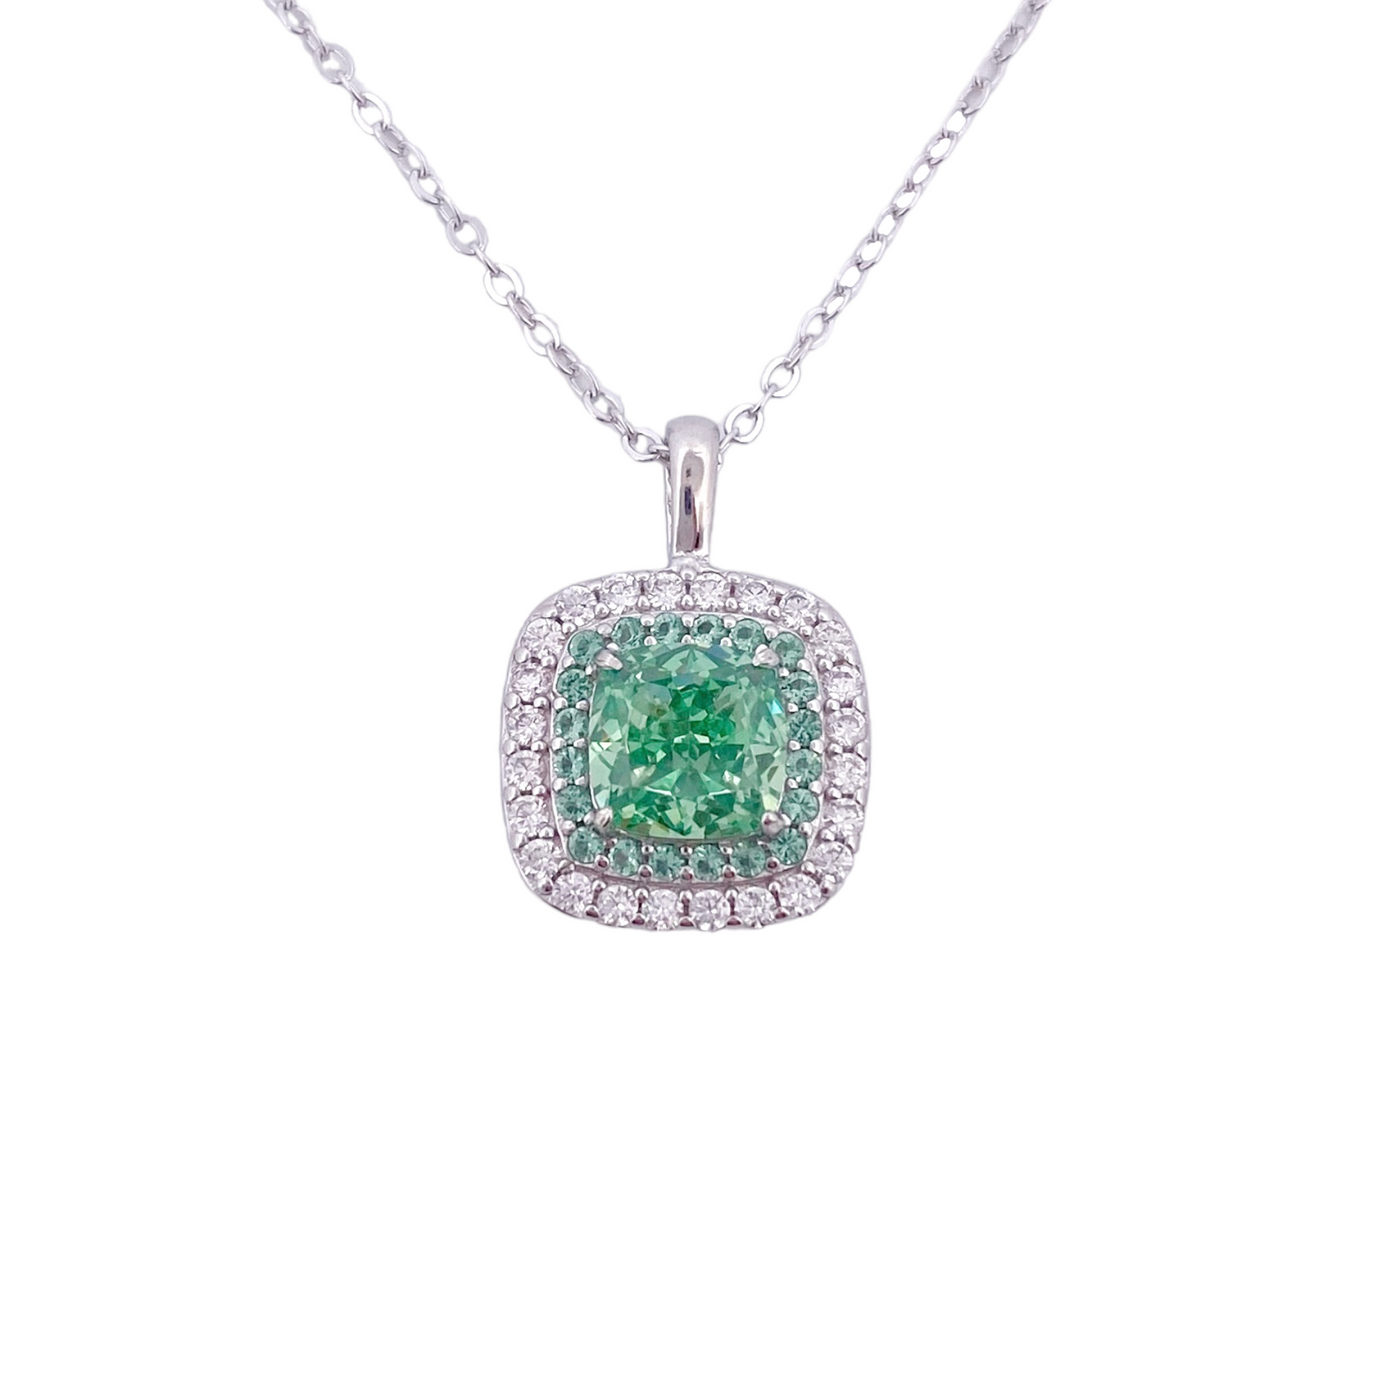 Silver necklace with a cushion diamond replica charm